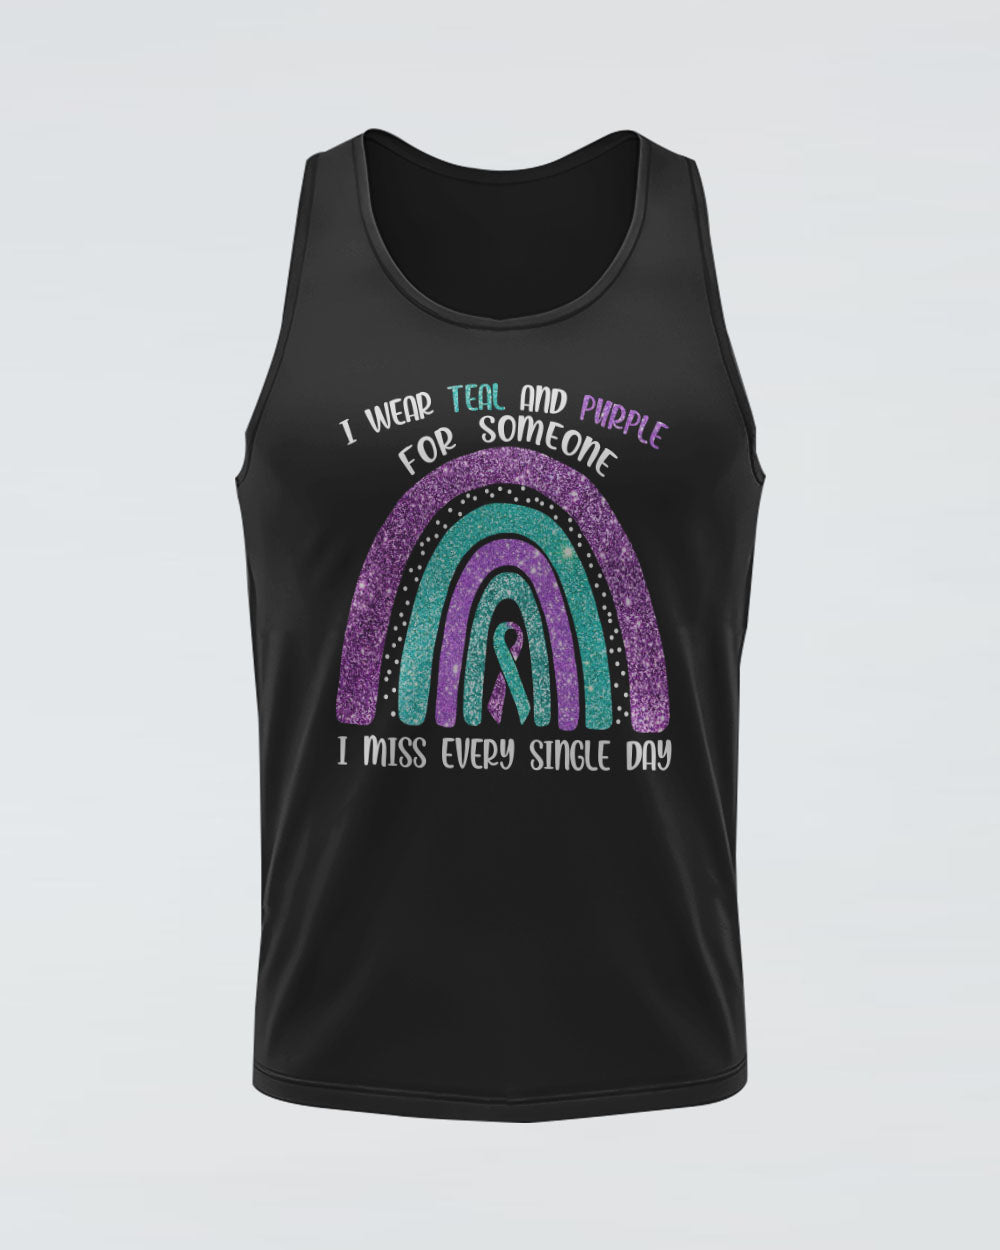 I Wear Teal And Purple For Someone Rainbow Women's Suicide Prevention Awareness Tanks